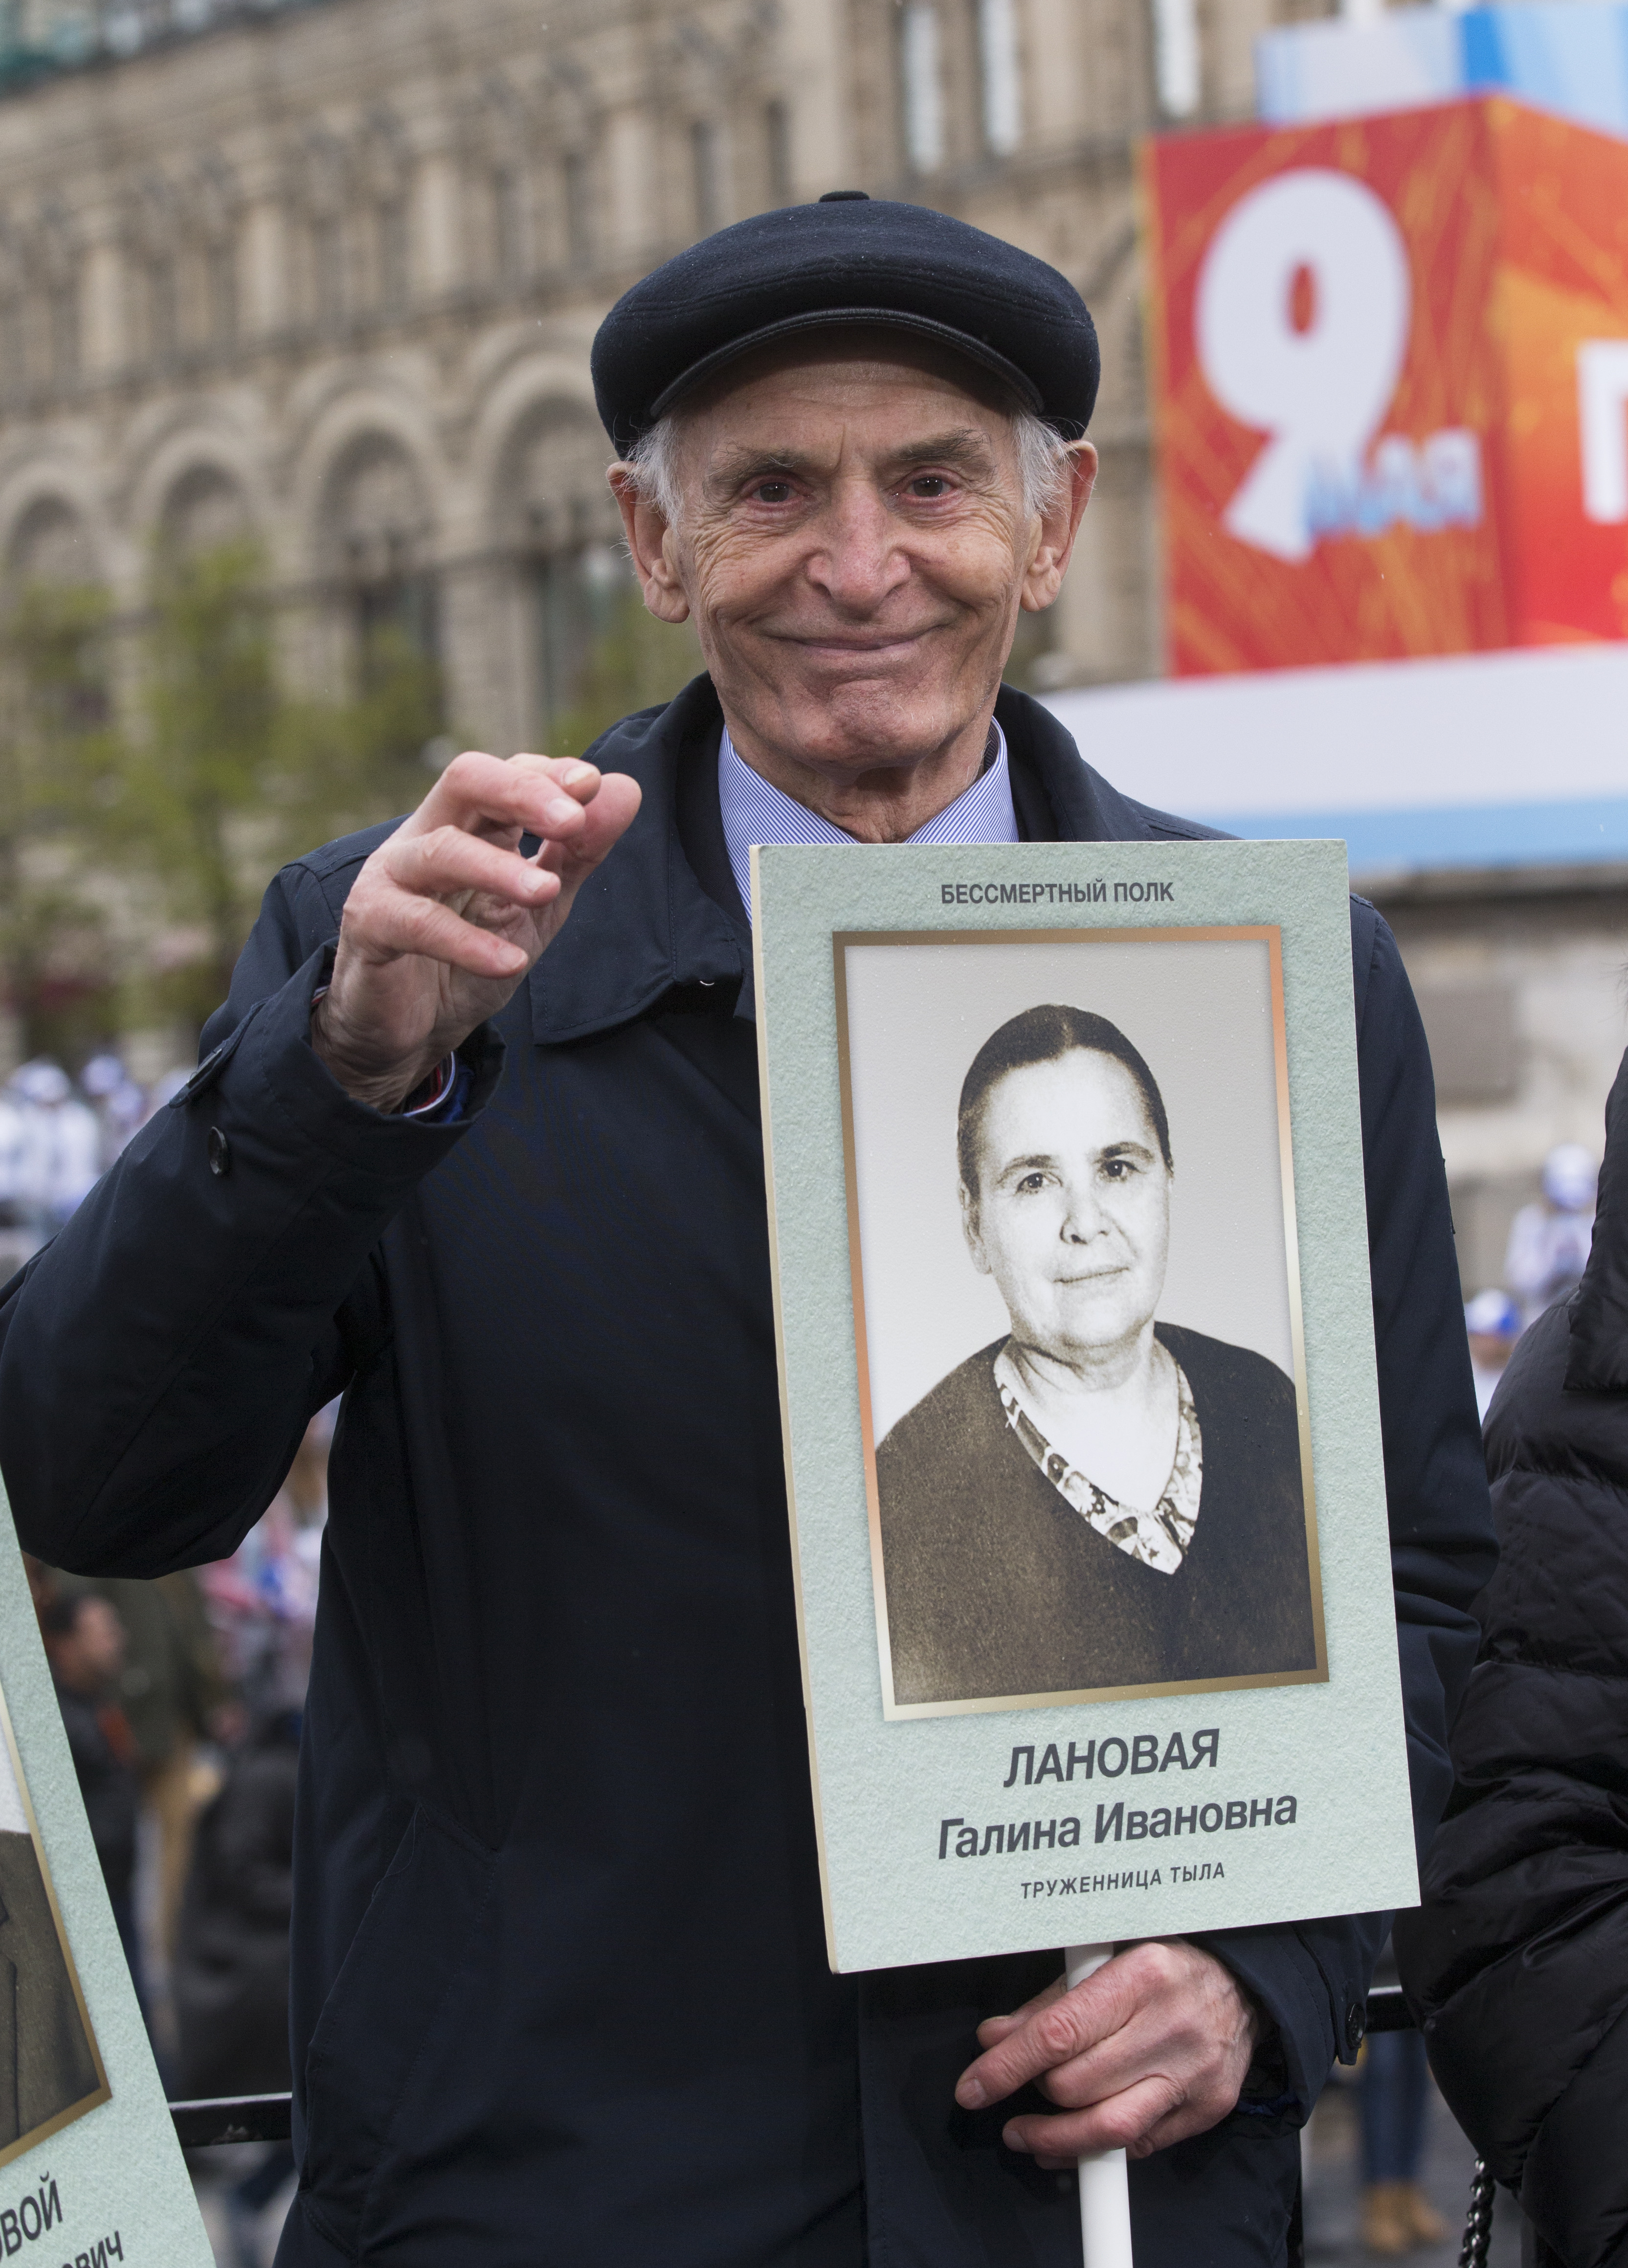 Russian actor Vasily Lanovoy holds a portrait of his mother during the Immortal Regiment march in Moscow's Red Square, Russia, May 9, 2017, celebrating 72 years since the end of WWII and the defeat of Nazi Germany. (AP Photo/Alexander Zemlianichenko)